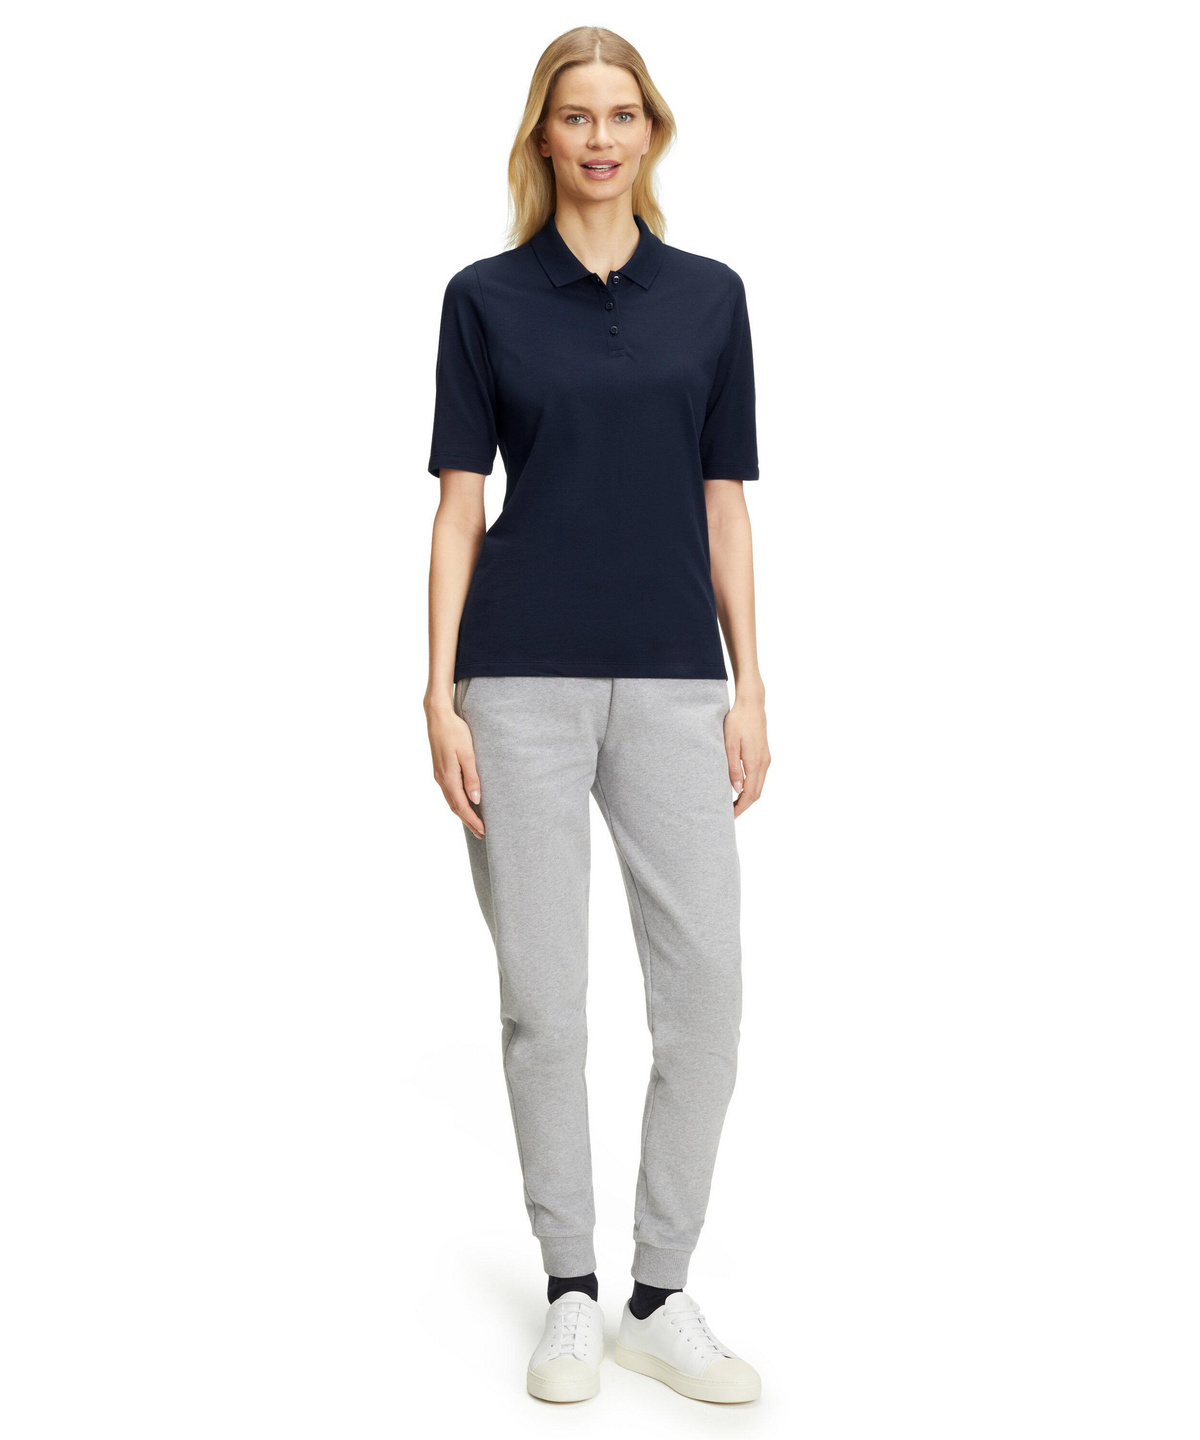 Can You Wear A Polo Shirt With Sweatpants? – solowomen